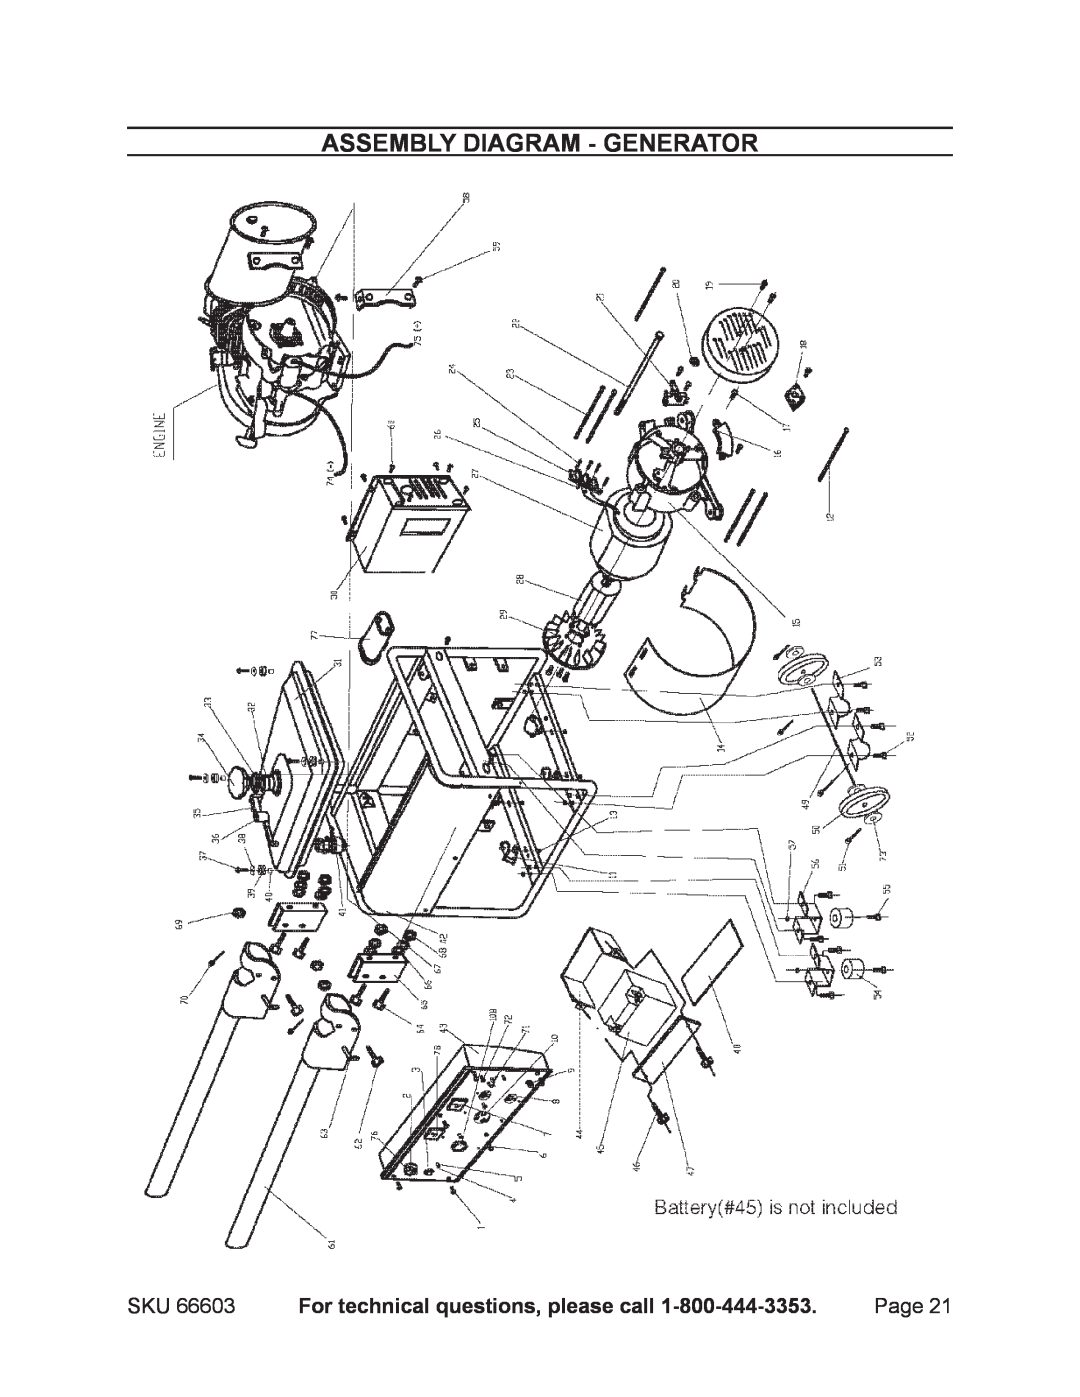 Chicago Electric 66603 manual Assembly Diagram - Generator, For technical questions, please call 